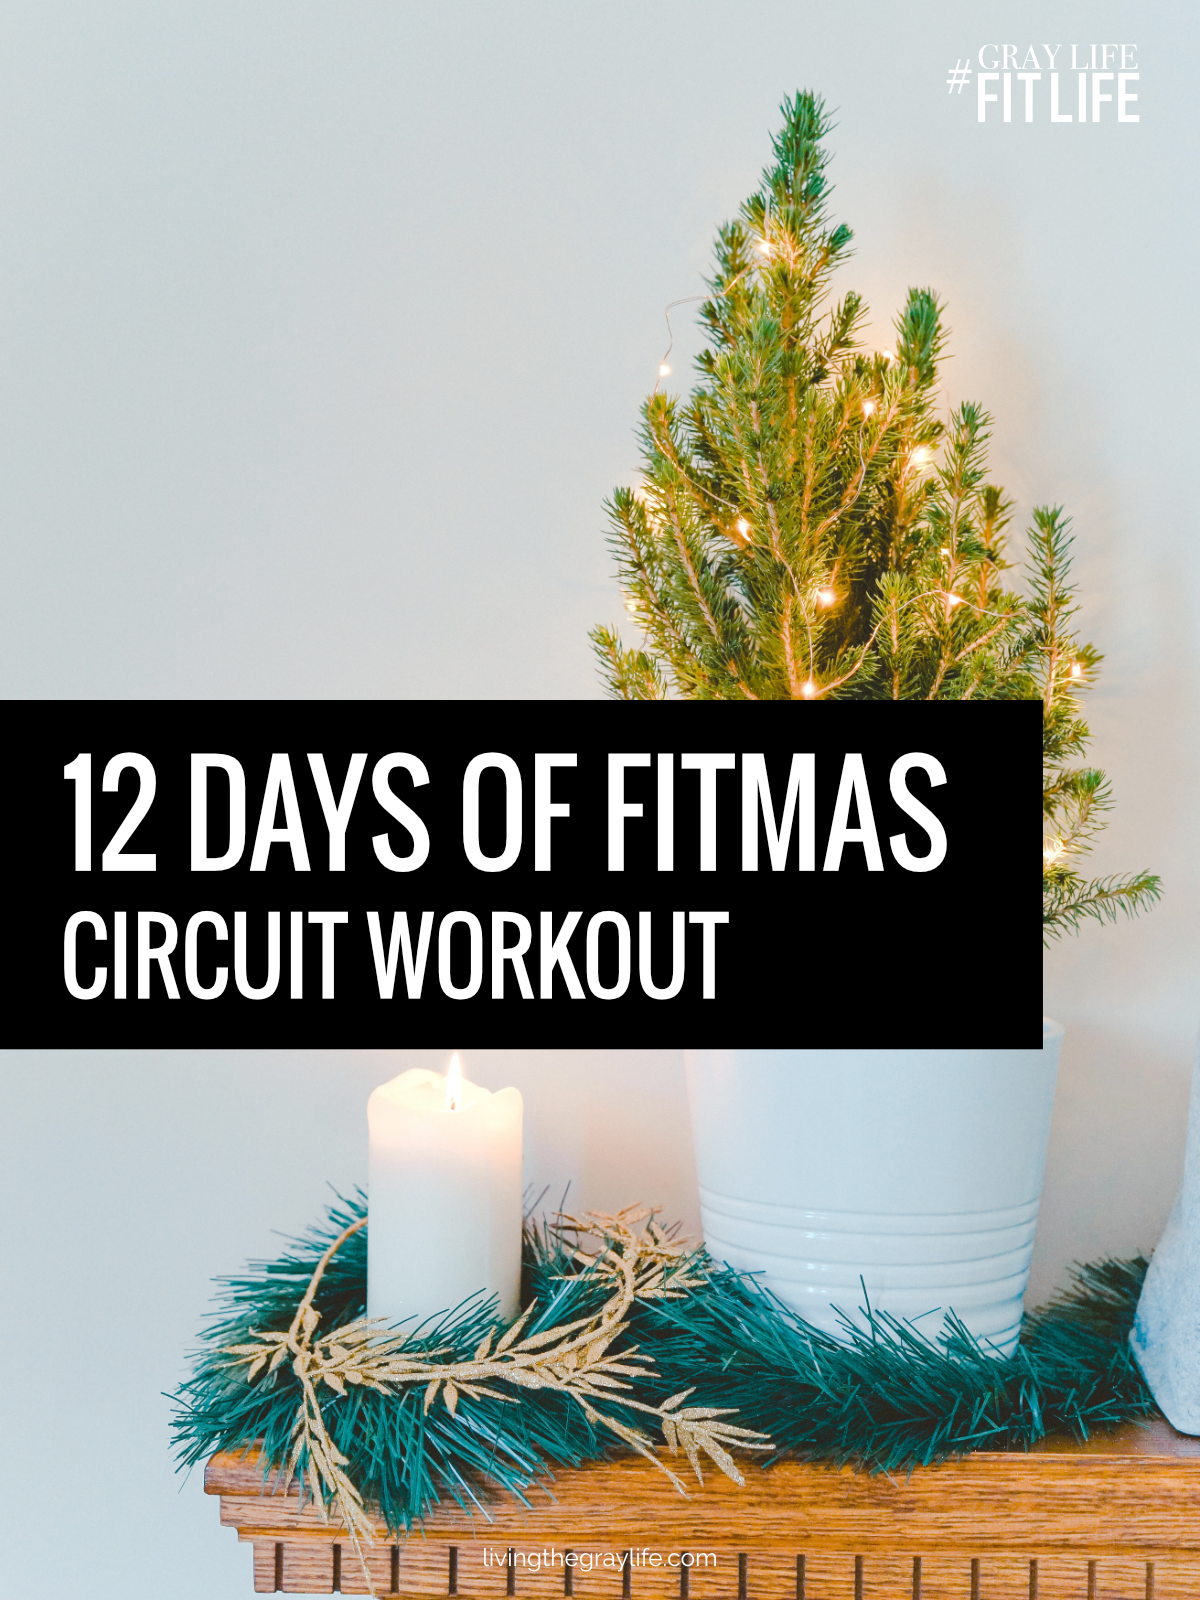 12 Days Of Fitmas Circuit Workout Cover